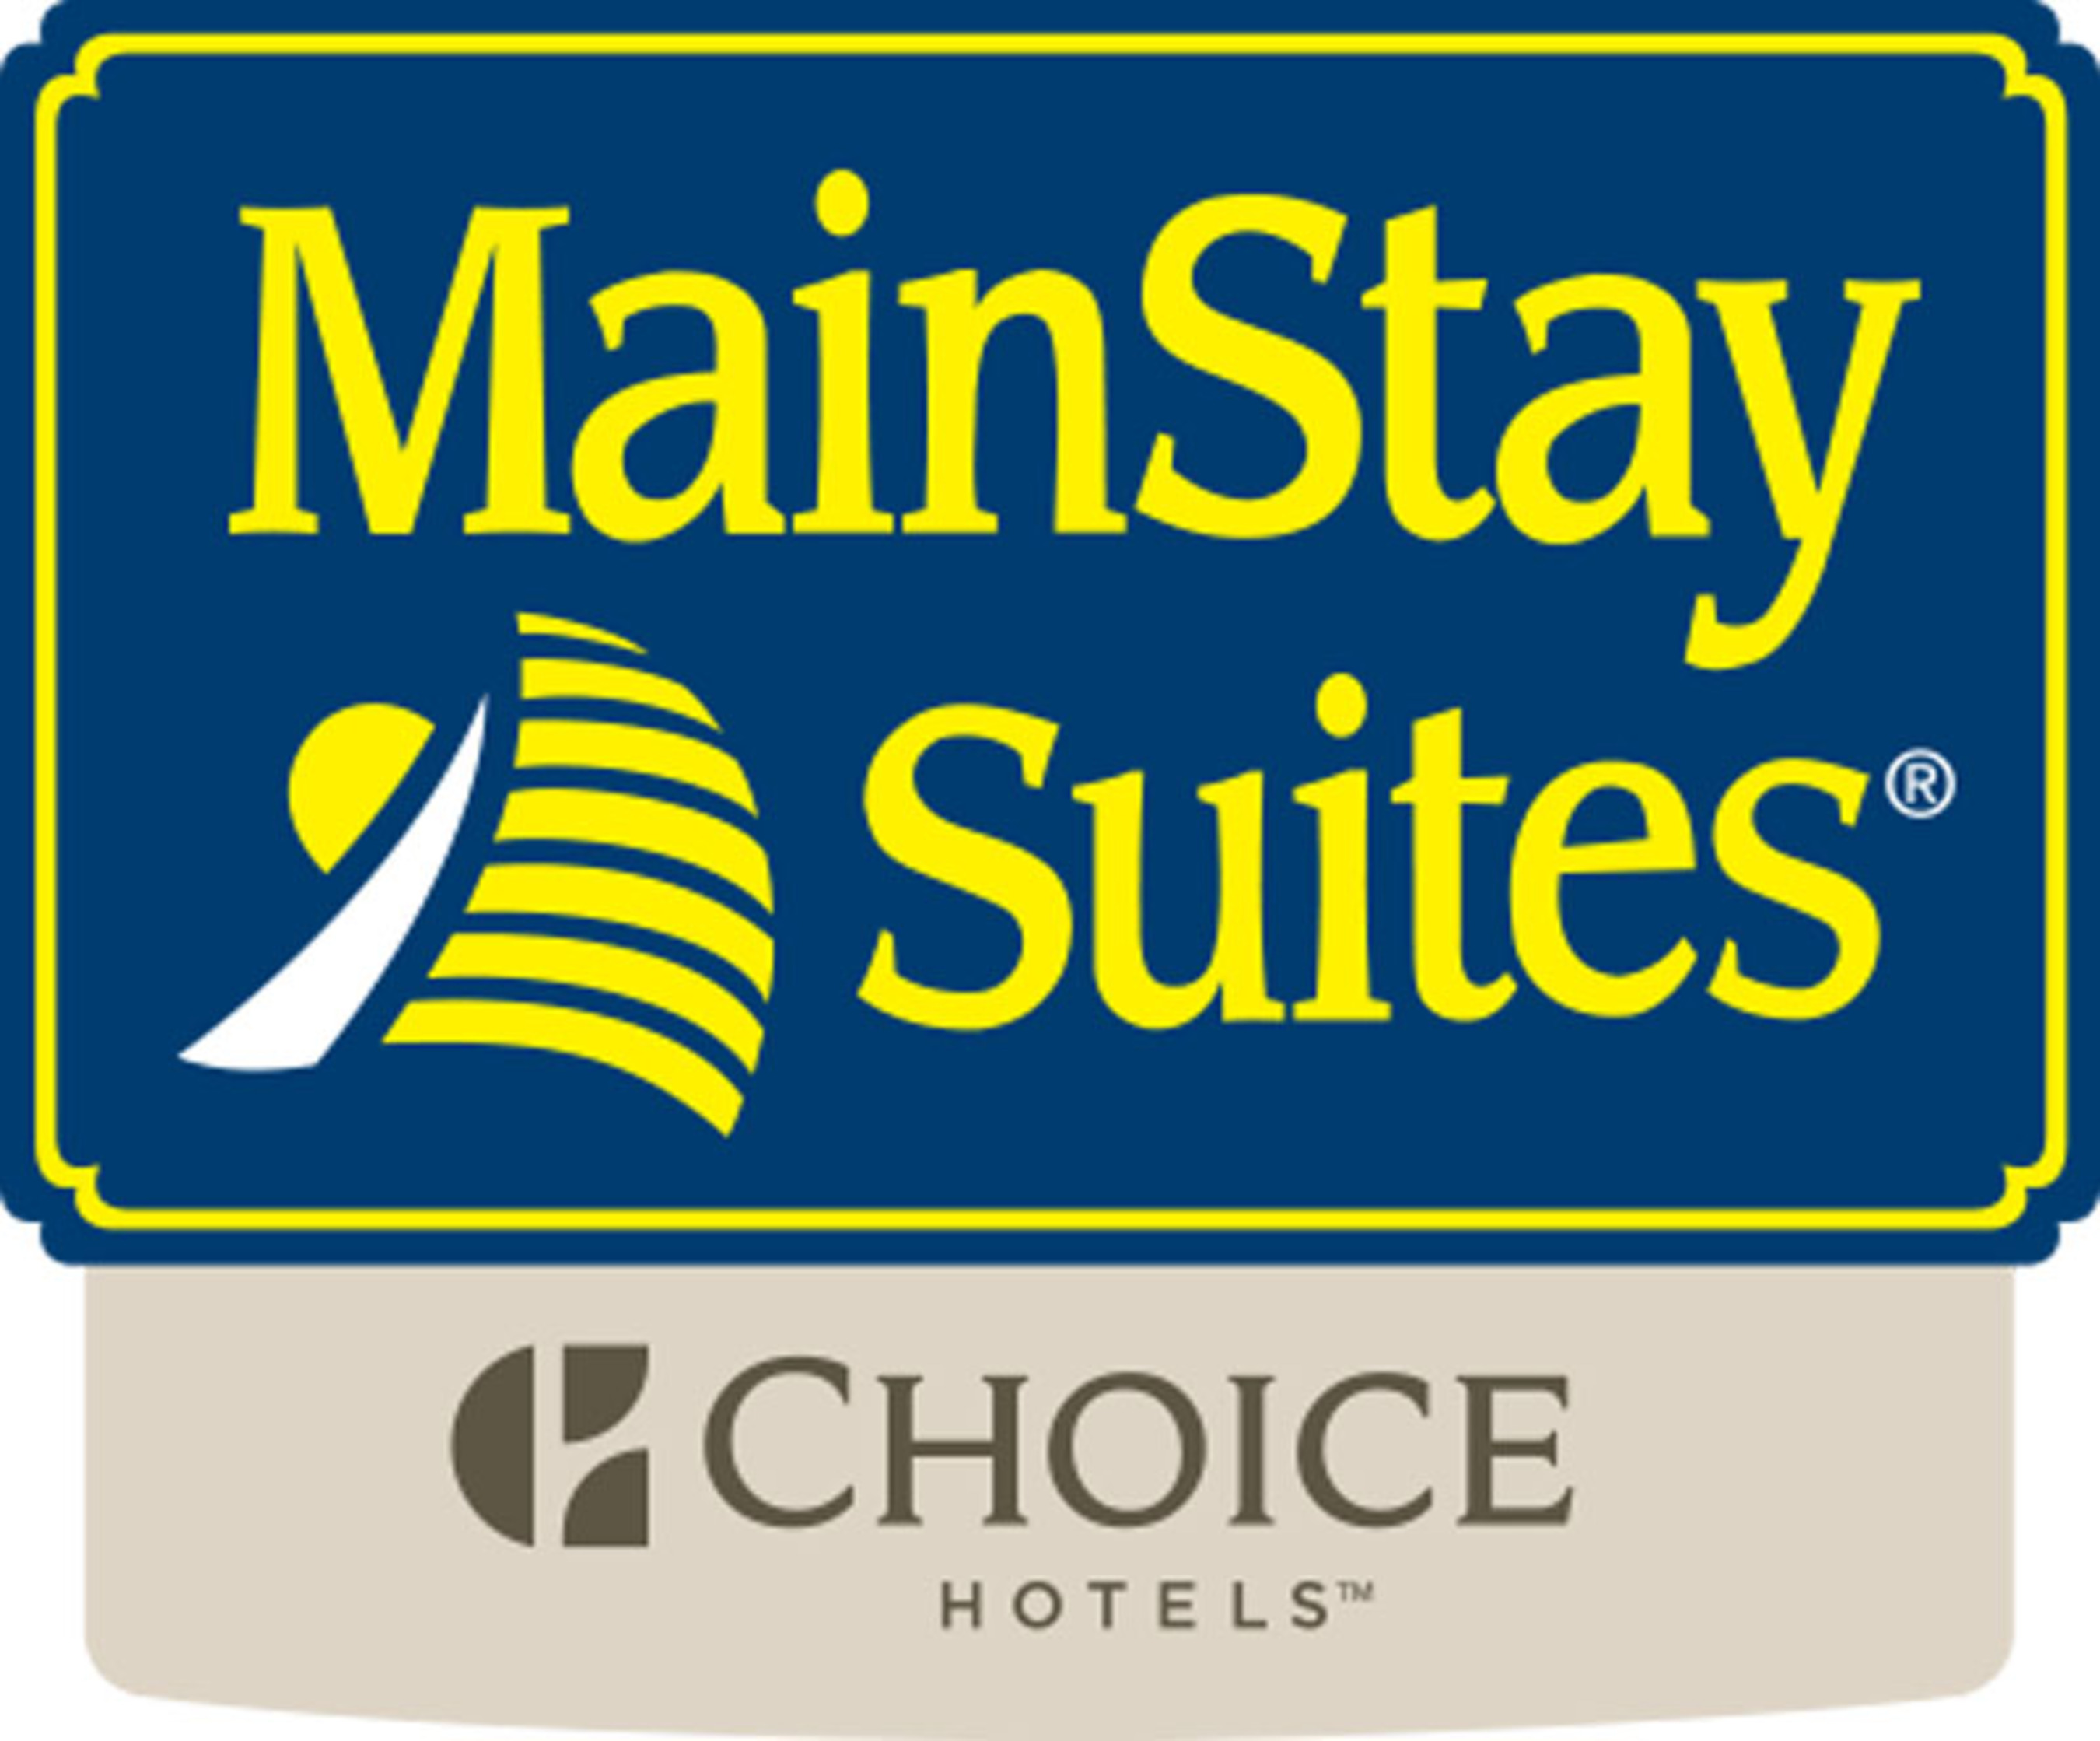 MainStay Suites.